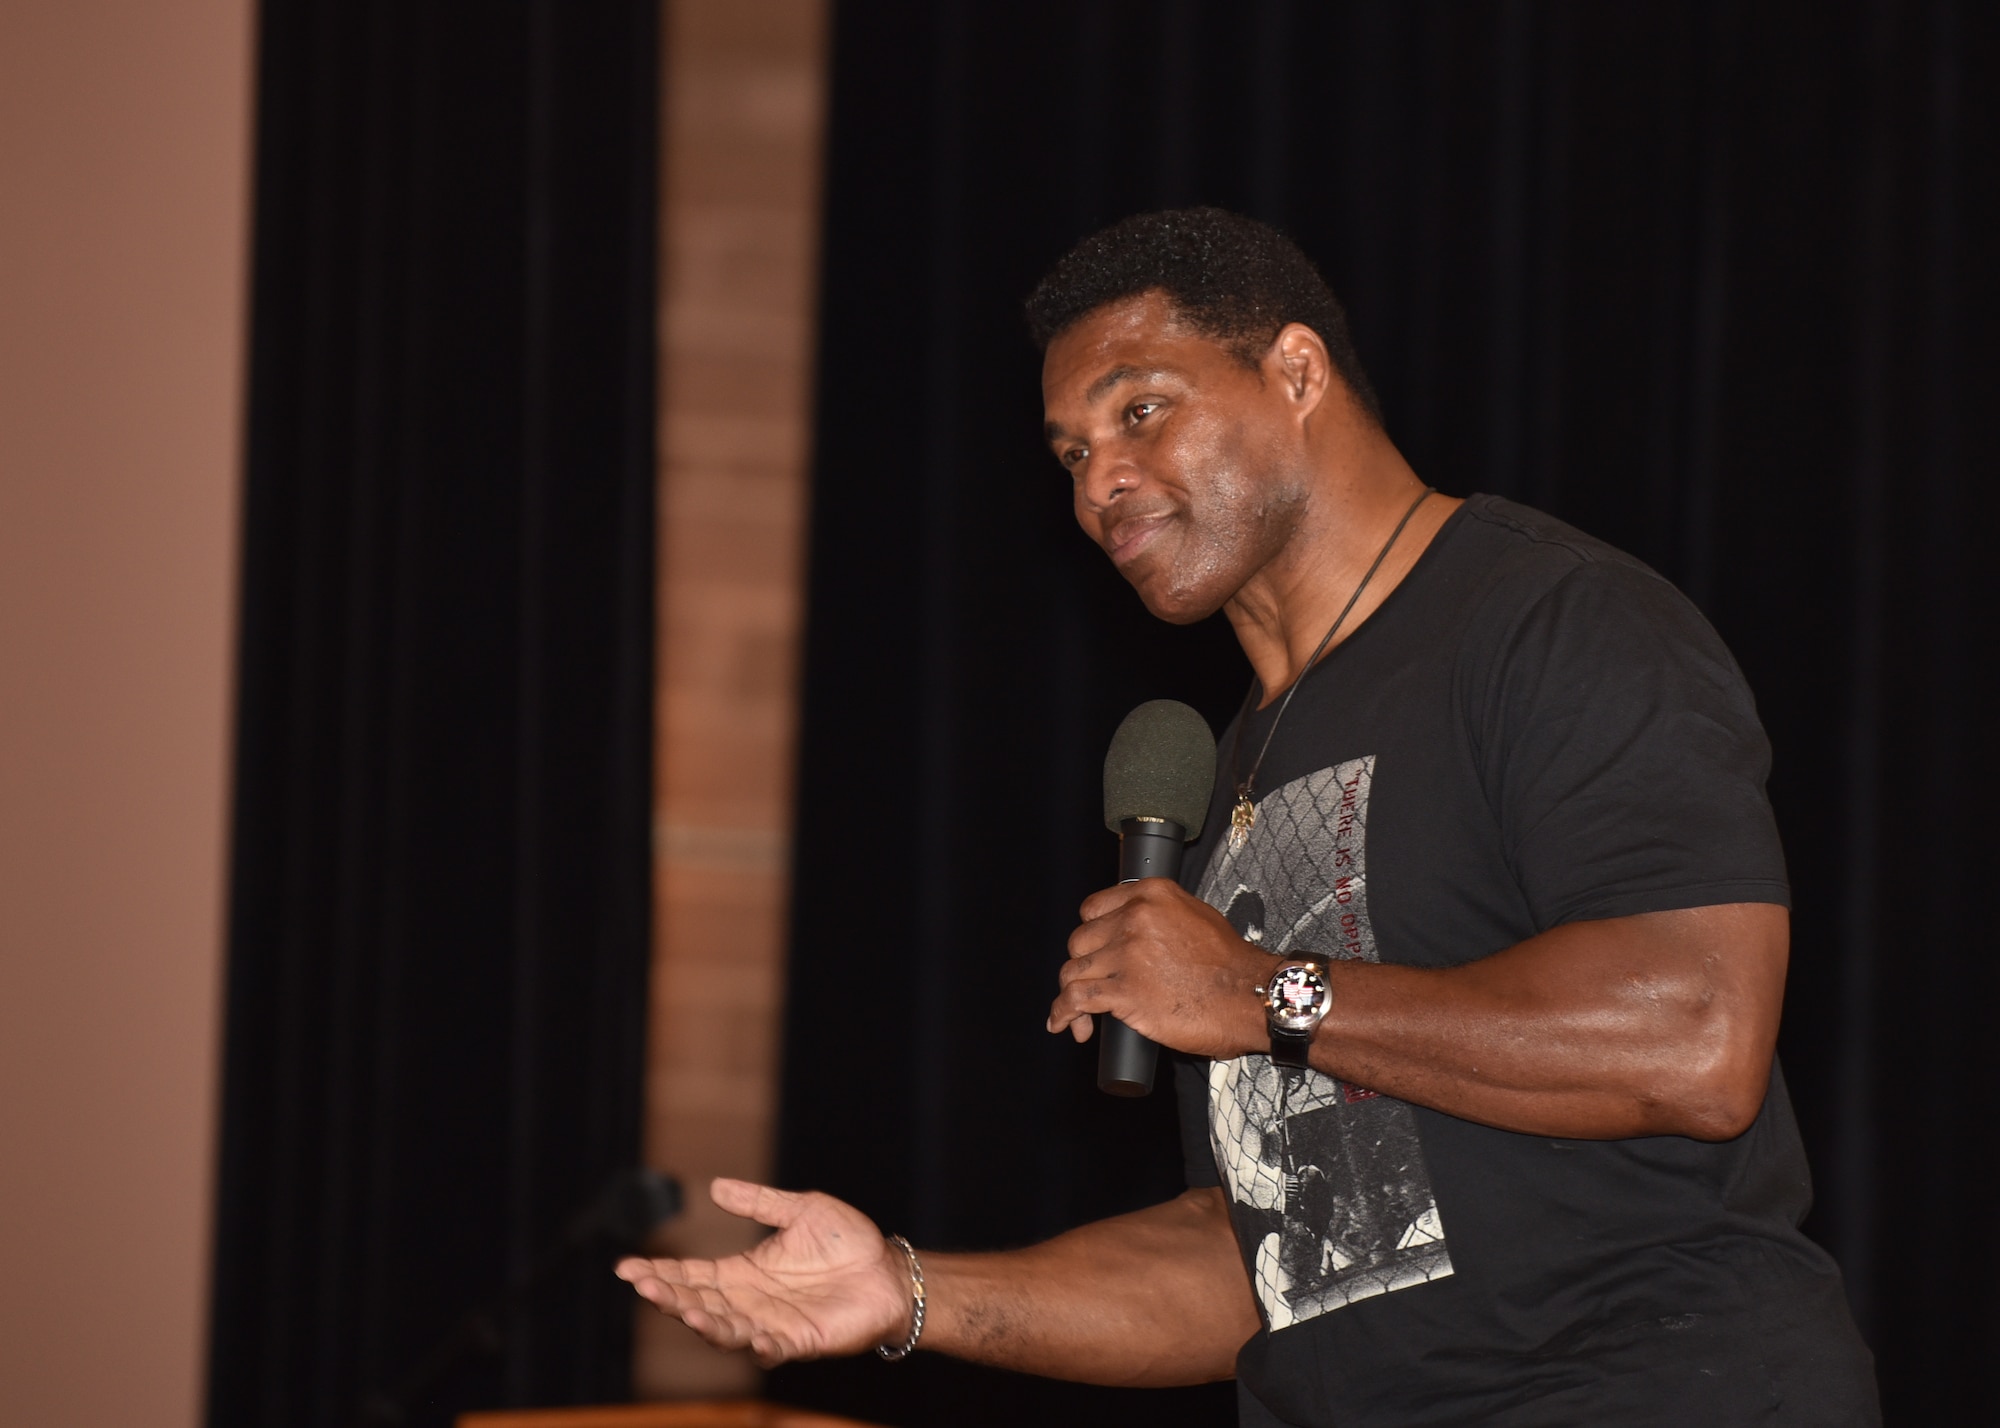 Herschel Walker, former professional football player, speaks to 90th Missile Wing Airmen Aug. 14, 2018, during his visit to F.E. Warren Air Force Base, Wyo. Walker’s speech encouraged Airmen to be resilient and never give up even through life’s toughest times. (U.S. Air Force photo by Airman 1st Class Braydon Williams)